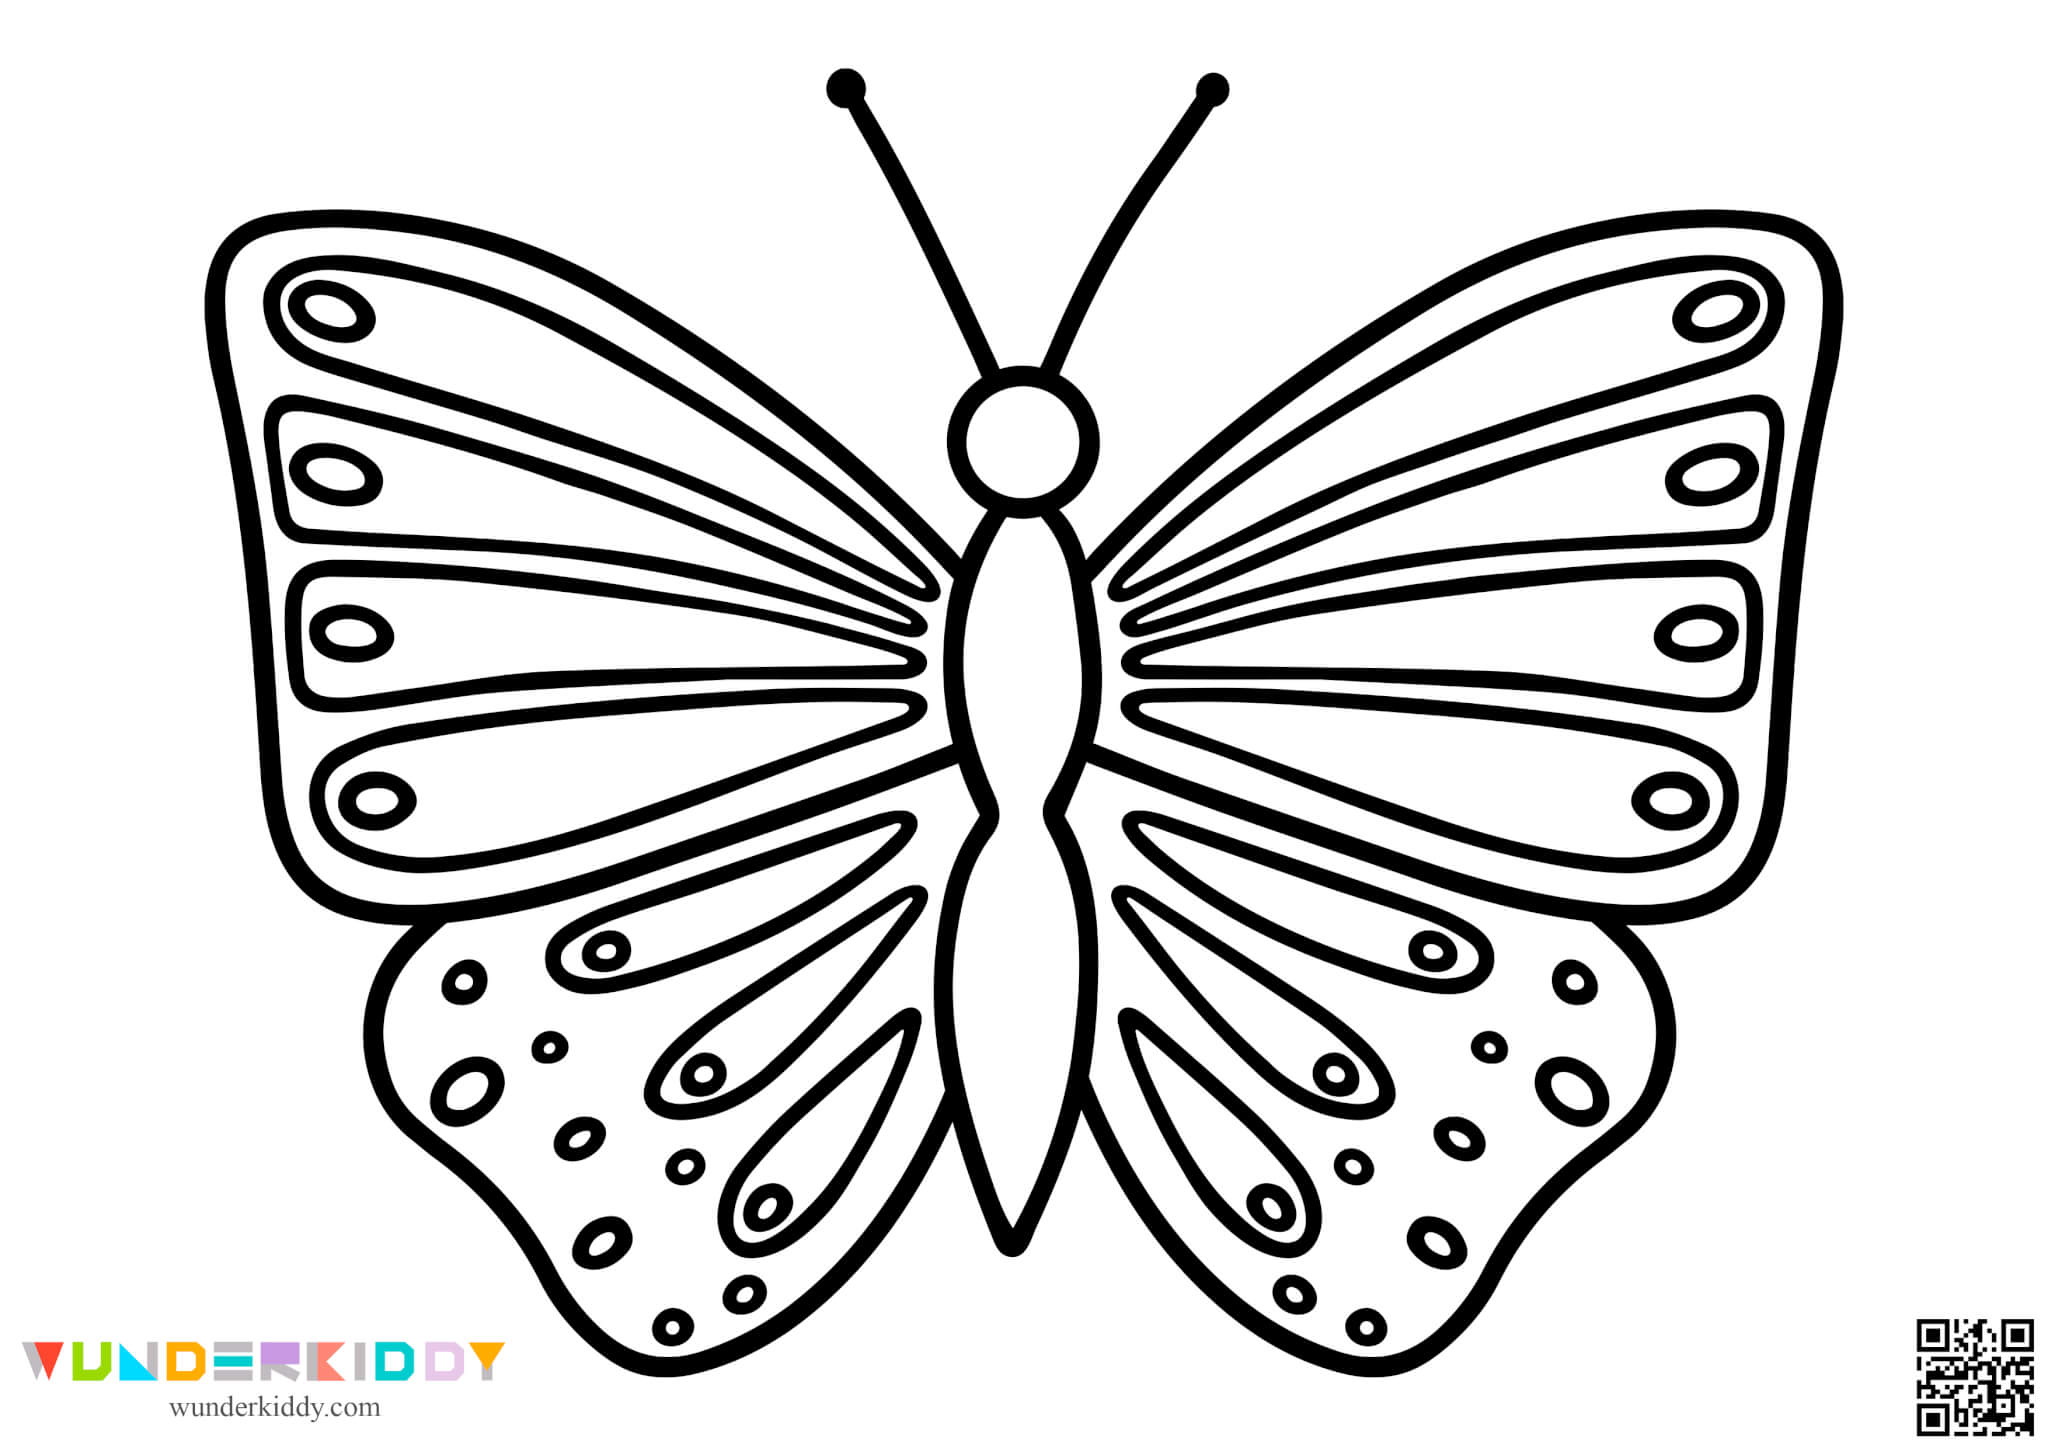 Butterfly Template Printable - Image 8